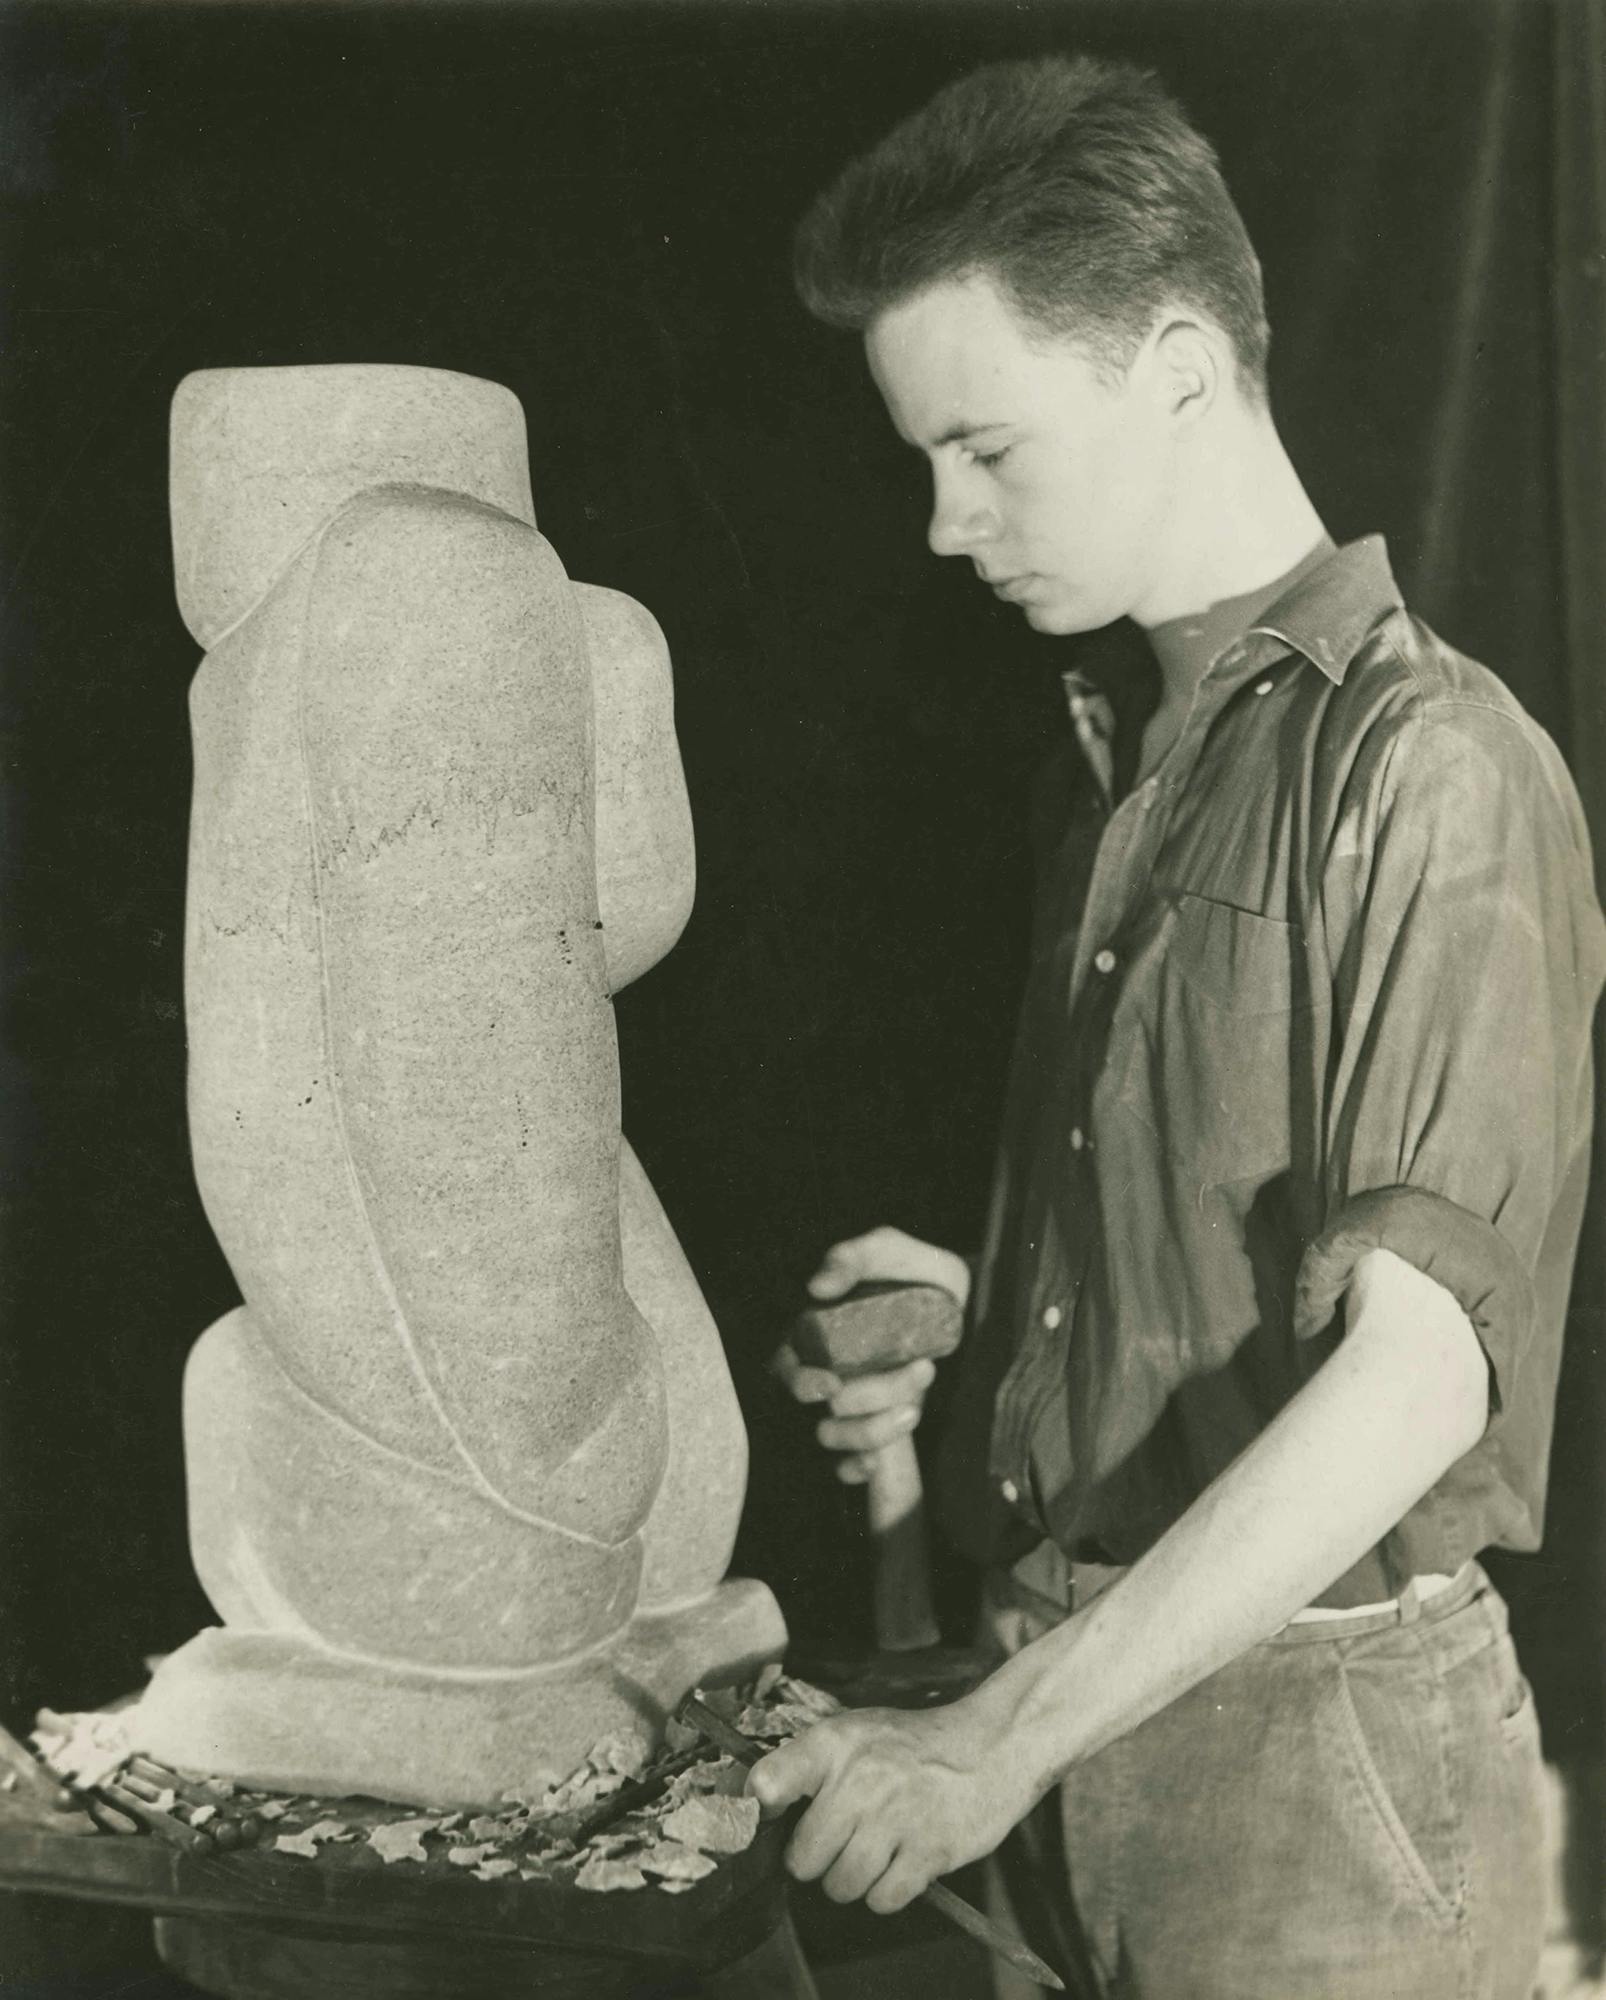 Richard Pousette-Dart with Tennessee Marble, c. 1937. – The Richard Pousette-Dart Foundation